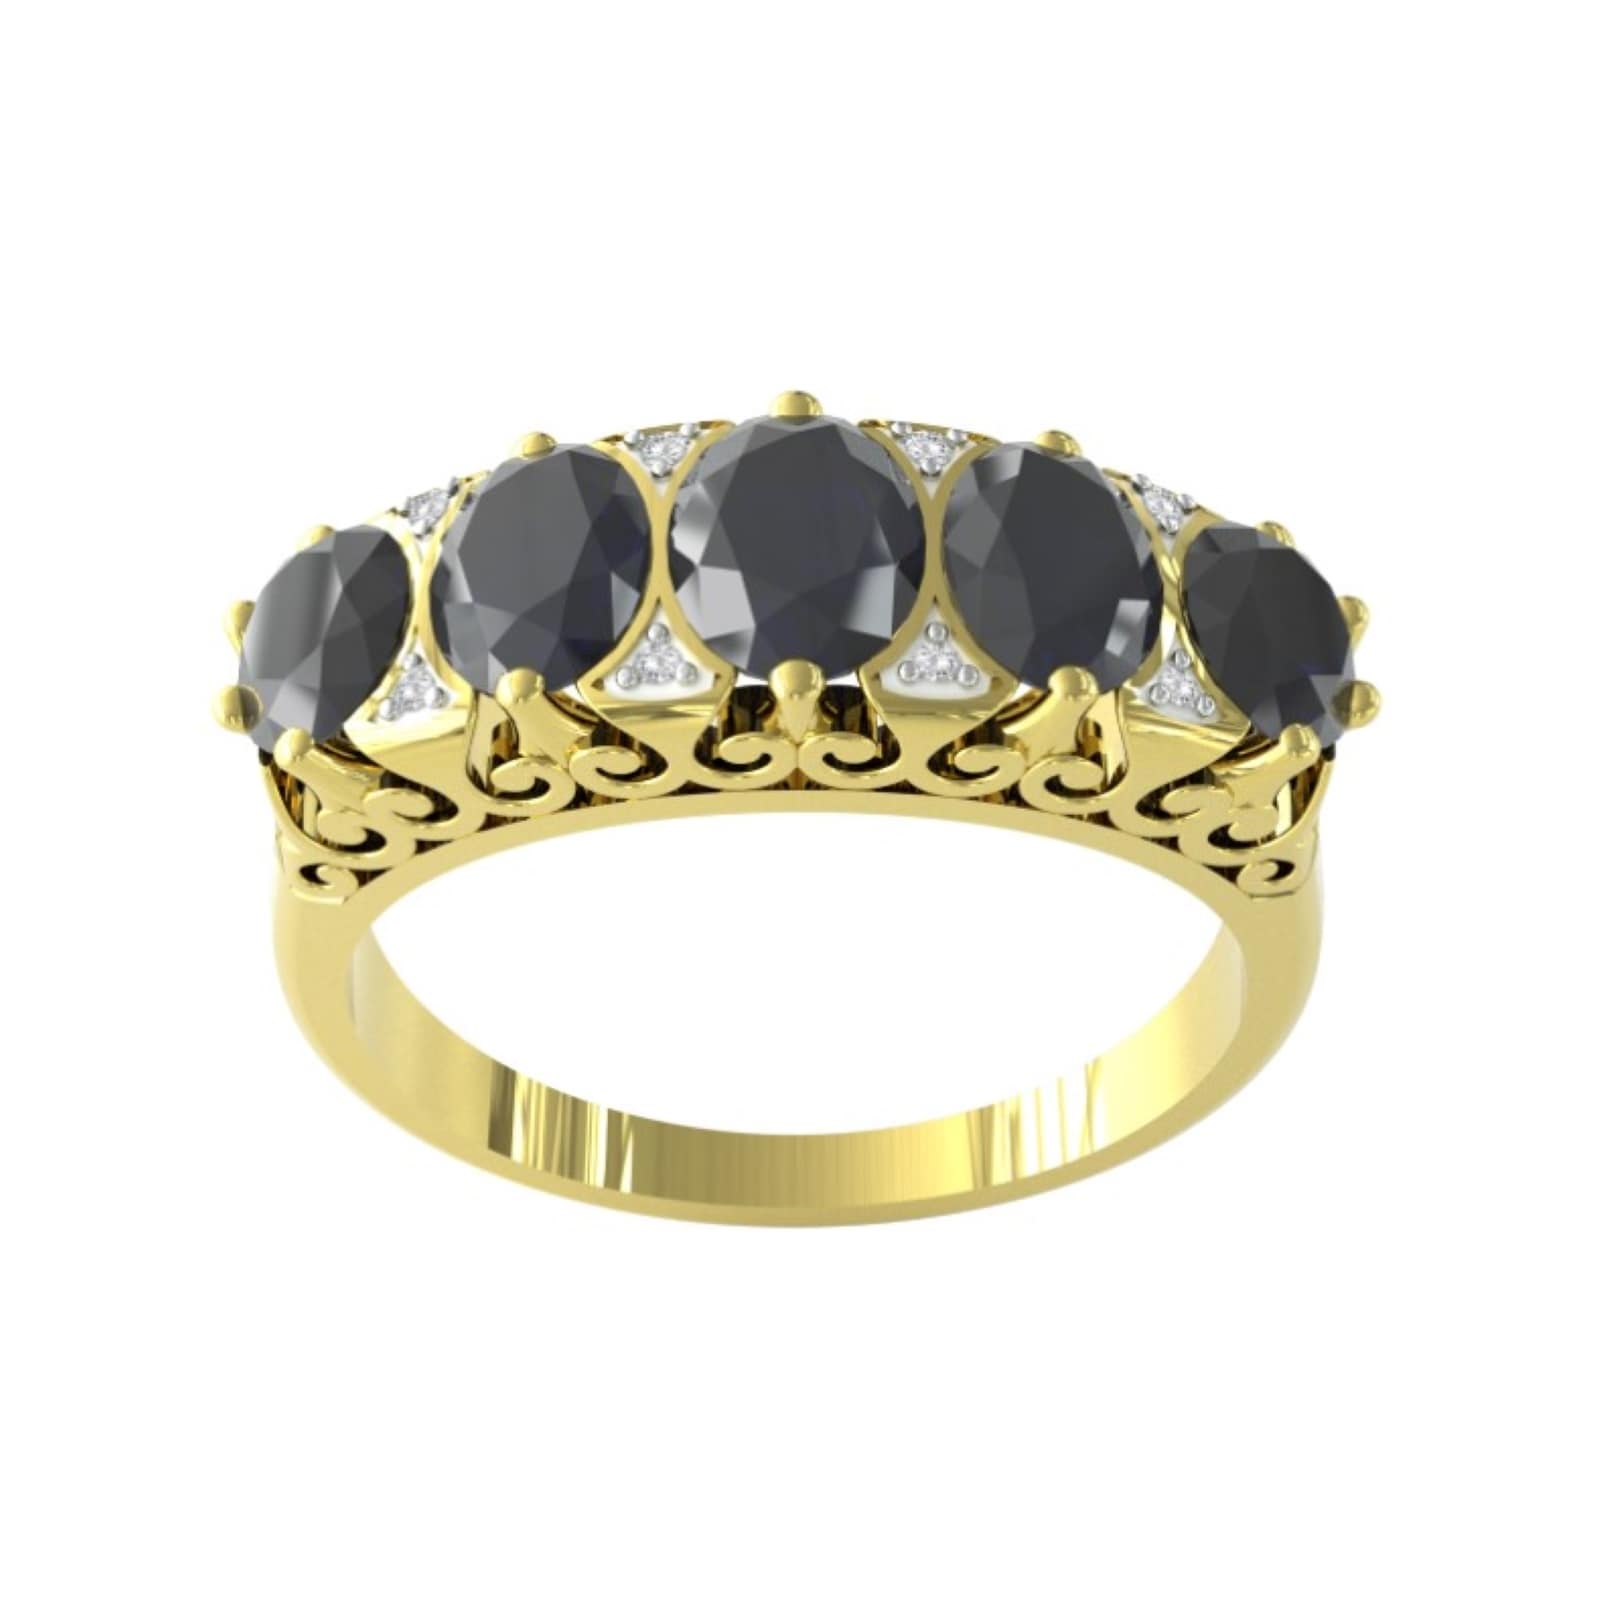 9ct Yellow Gold Victorian Style Sapphire & Diamond 5 Stone Ring - Ring Size X.5